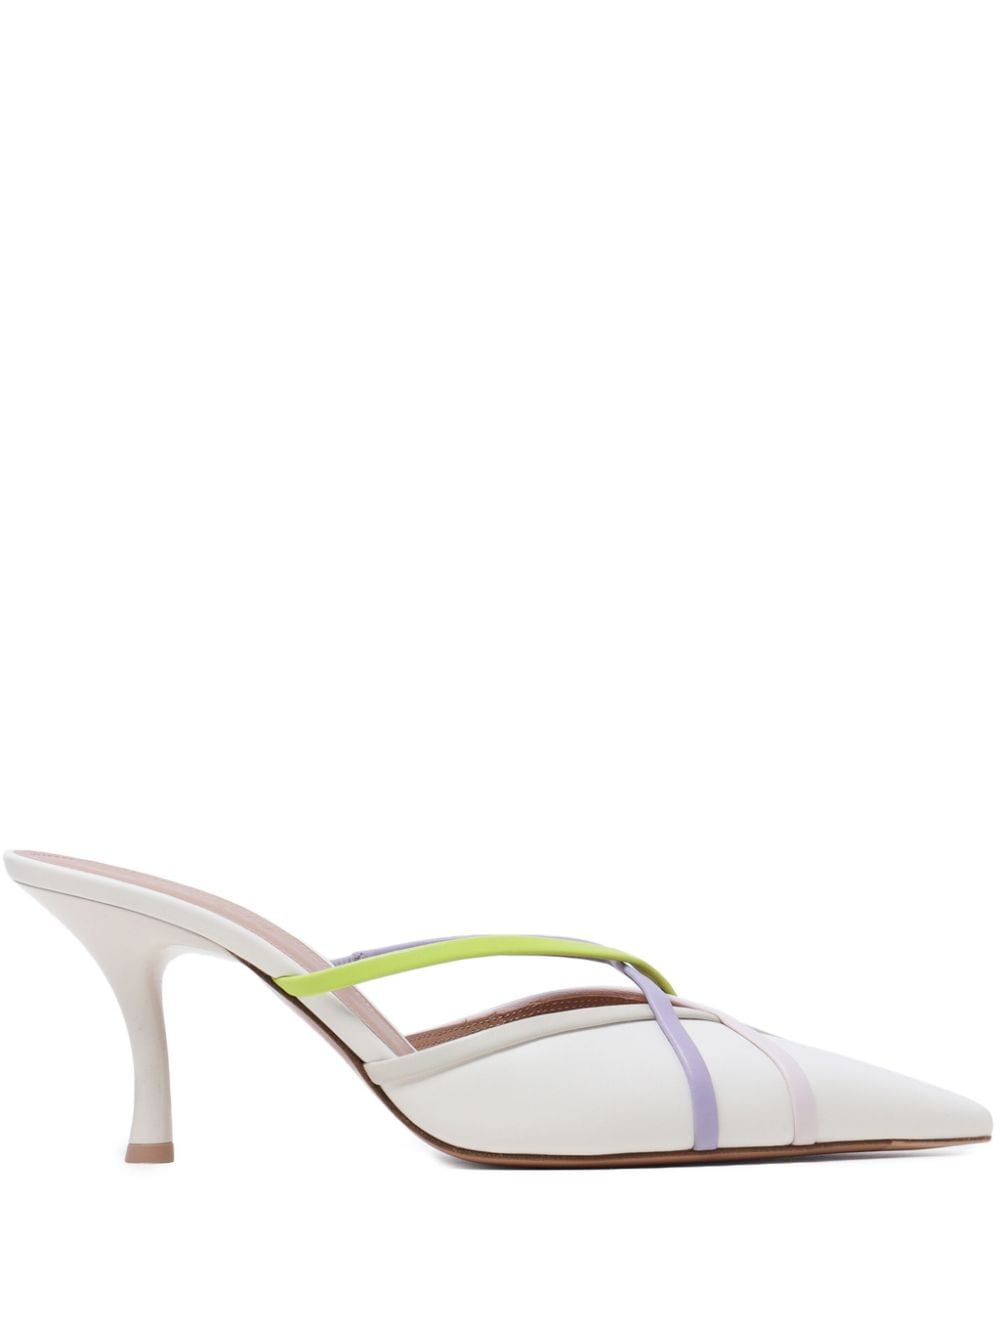 Malone Souliers pointed-toe leather mules - White von Malone Souliers